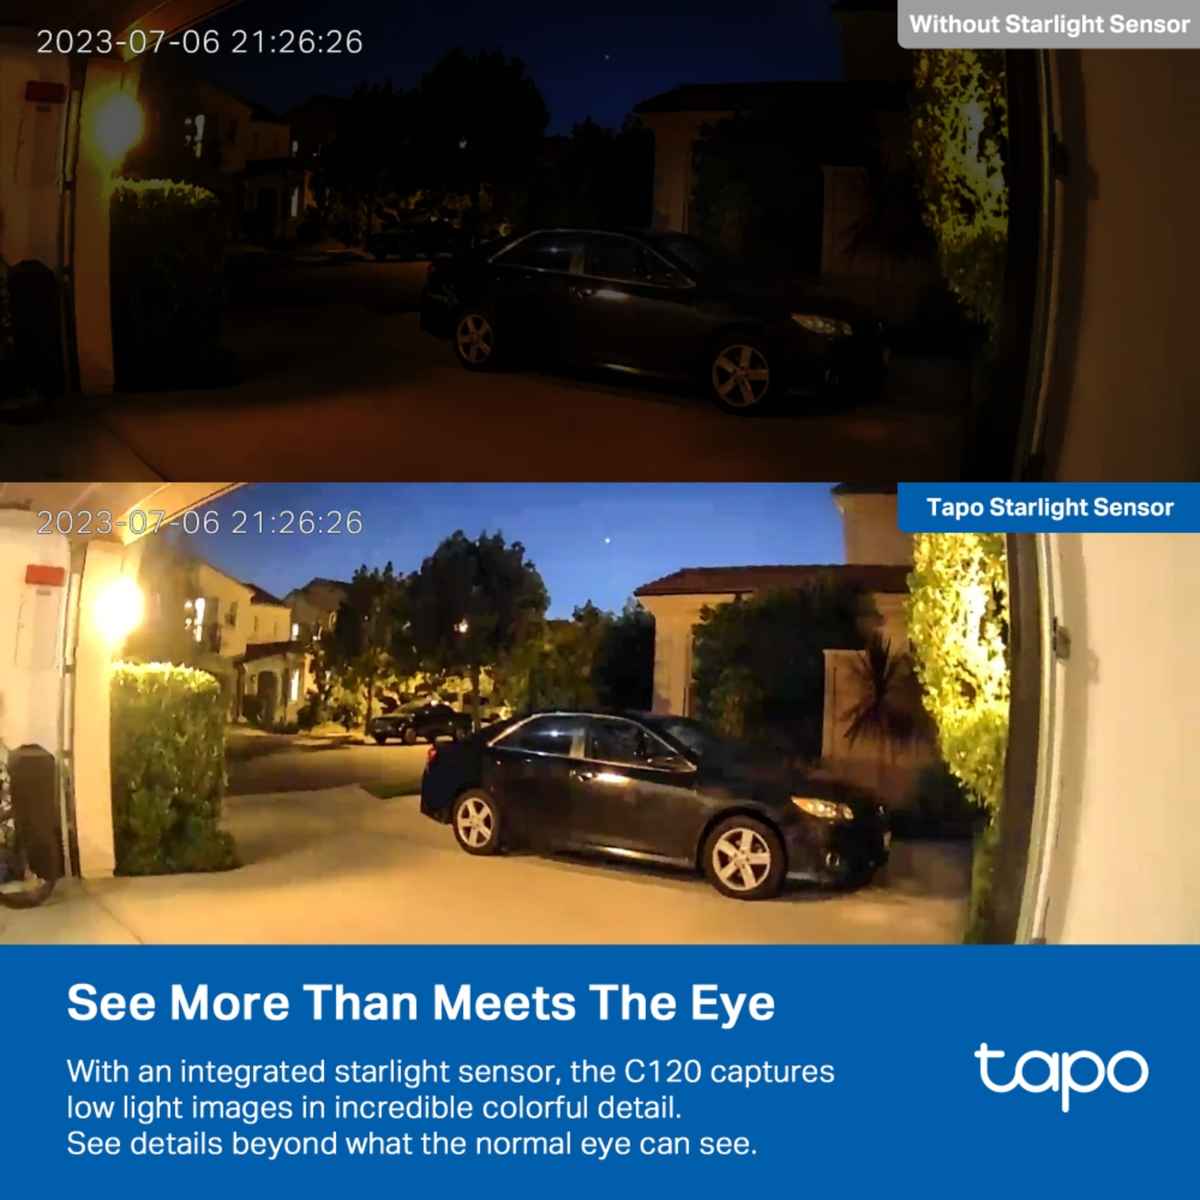 TP-Link Tapo C120 Indoor/Outdoor Wi-Fi Home Security Camera